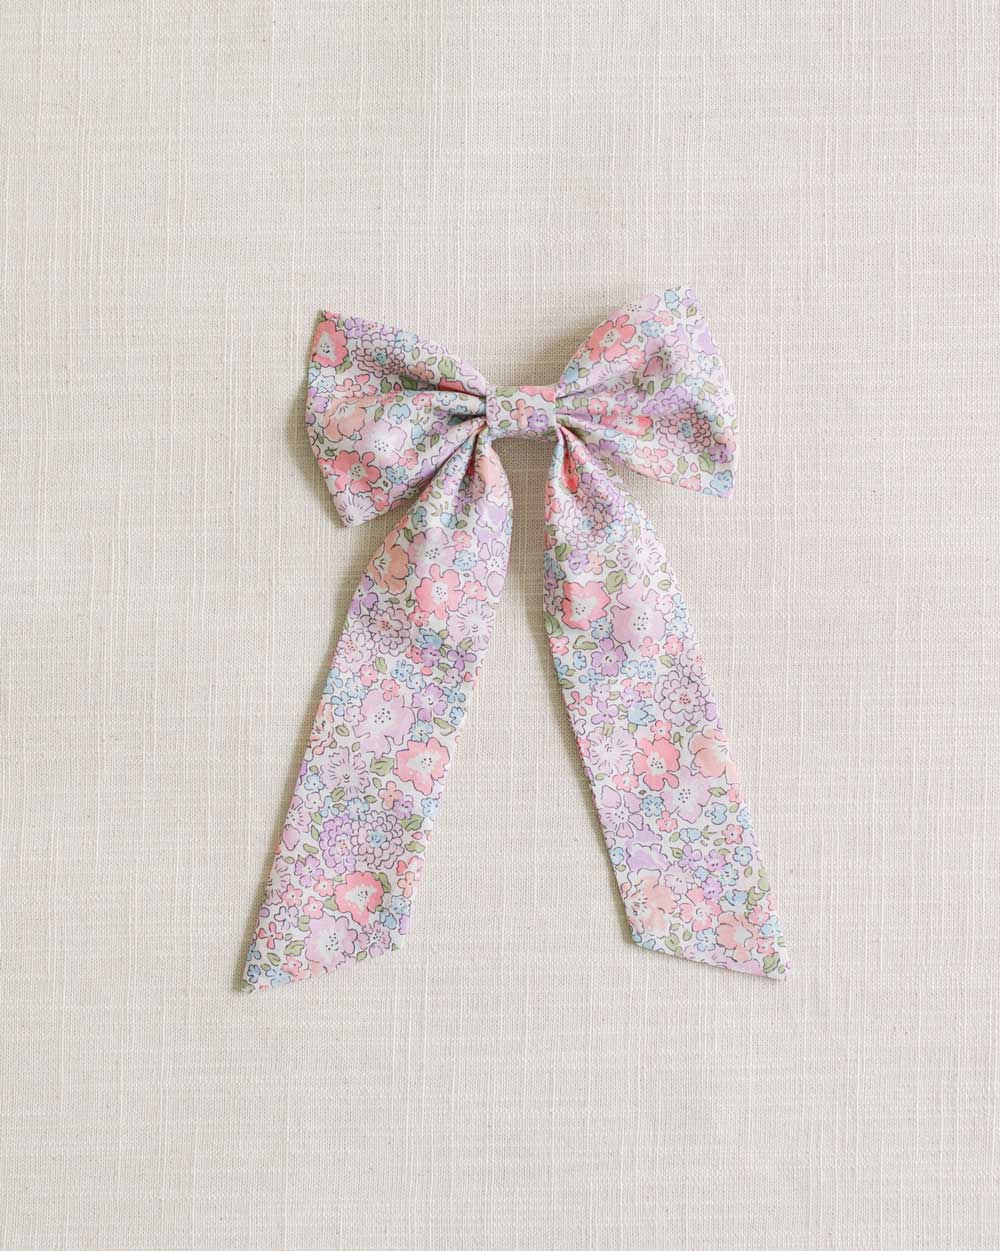 THE PASTEL FLORAL CHILDREN'S BOW MADE WITH LIBERTY FABRIC